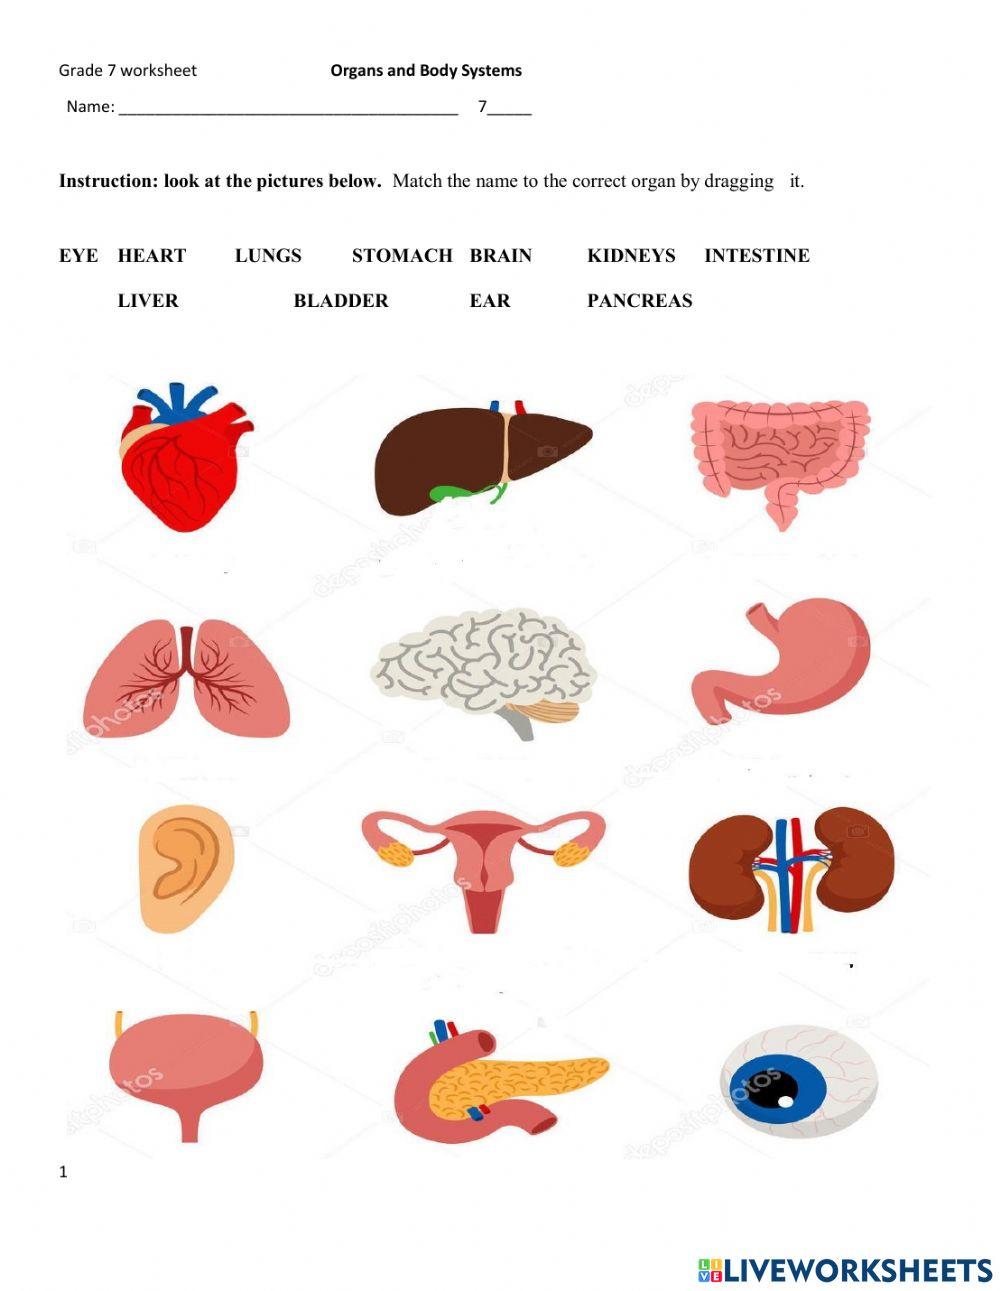 Organs and Body systems